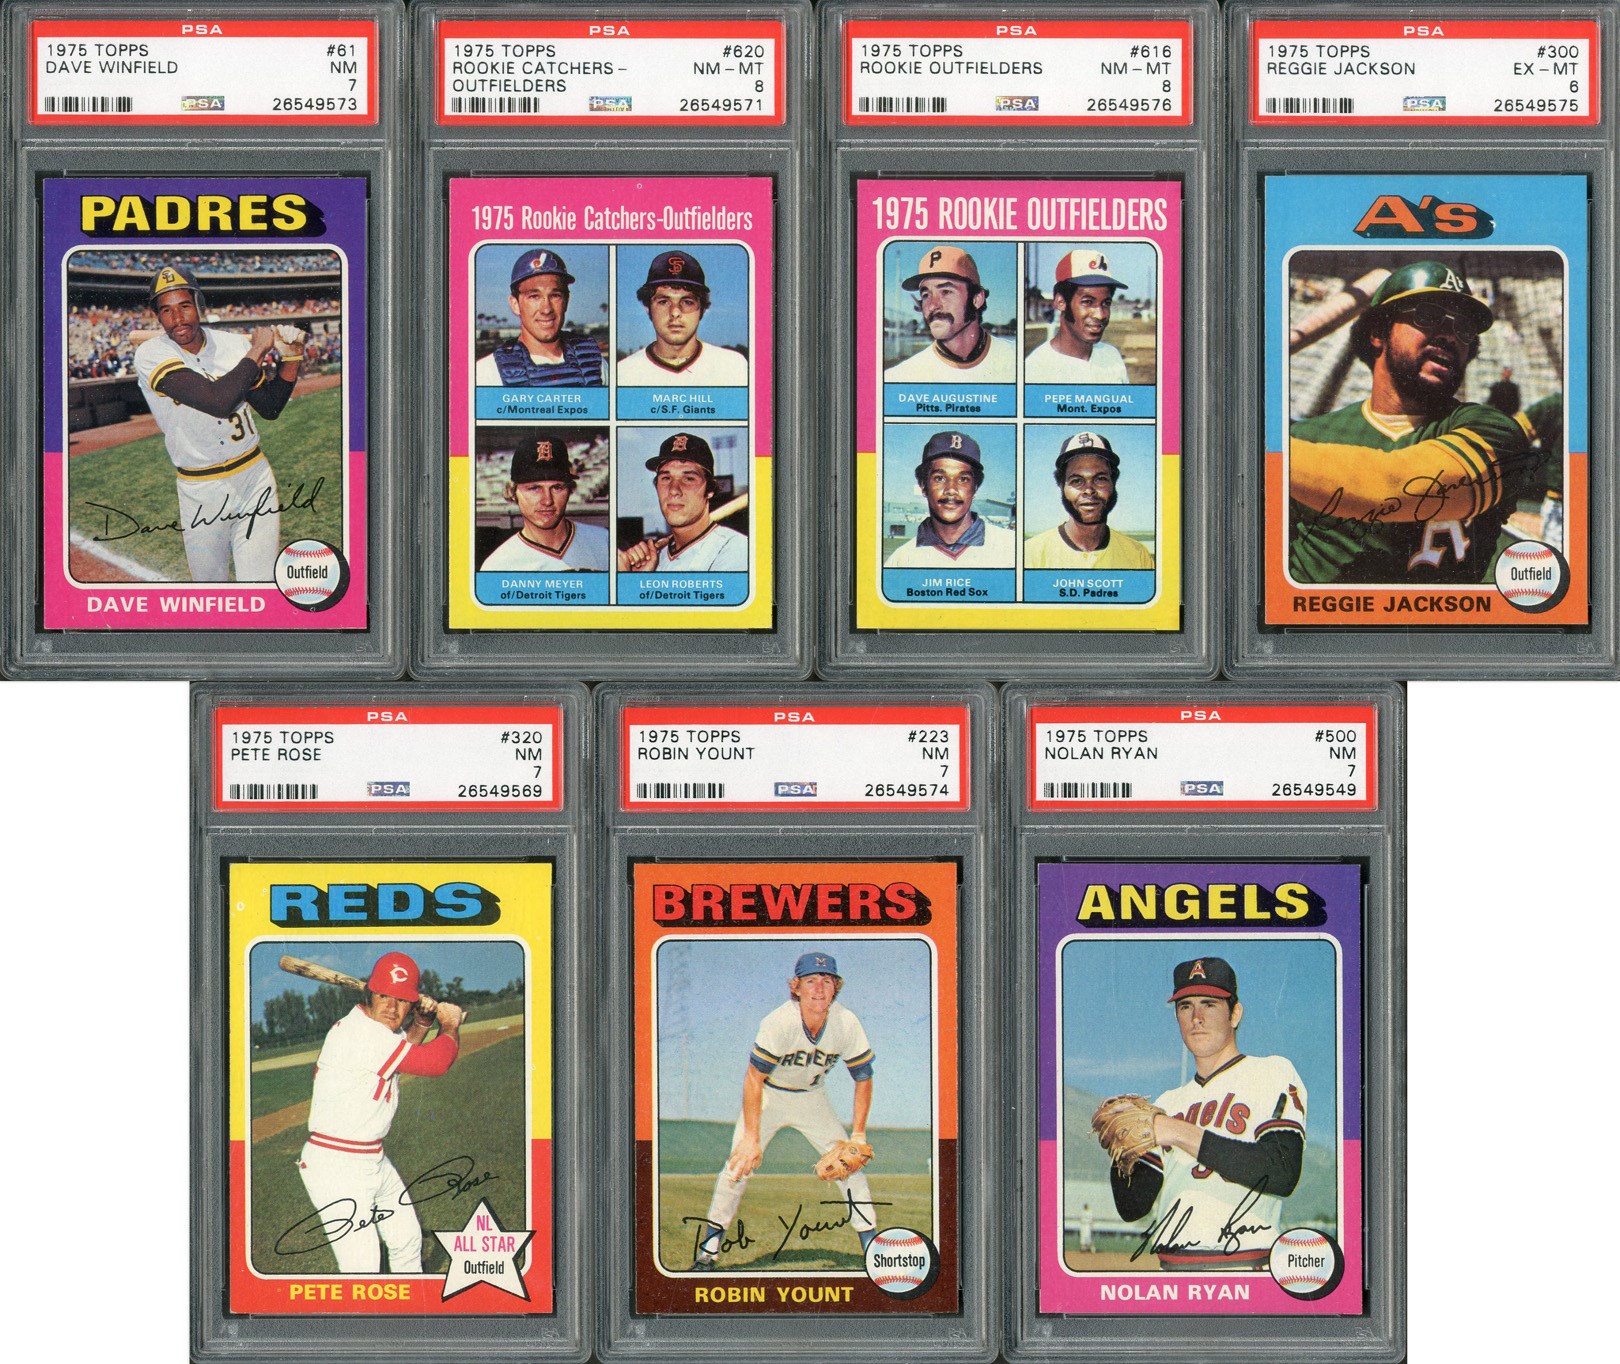 Baseball and Trading Cards - 1975 Topps High Grade Complete Set with (7) PSA Graded